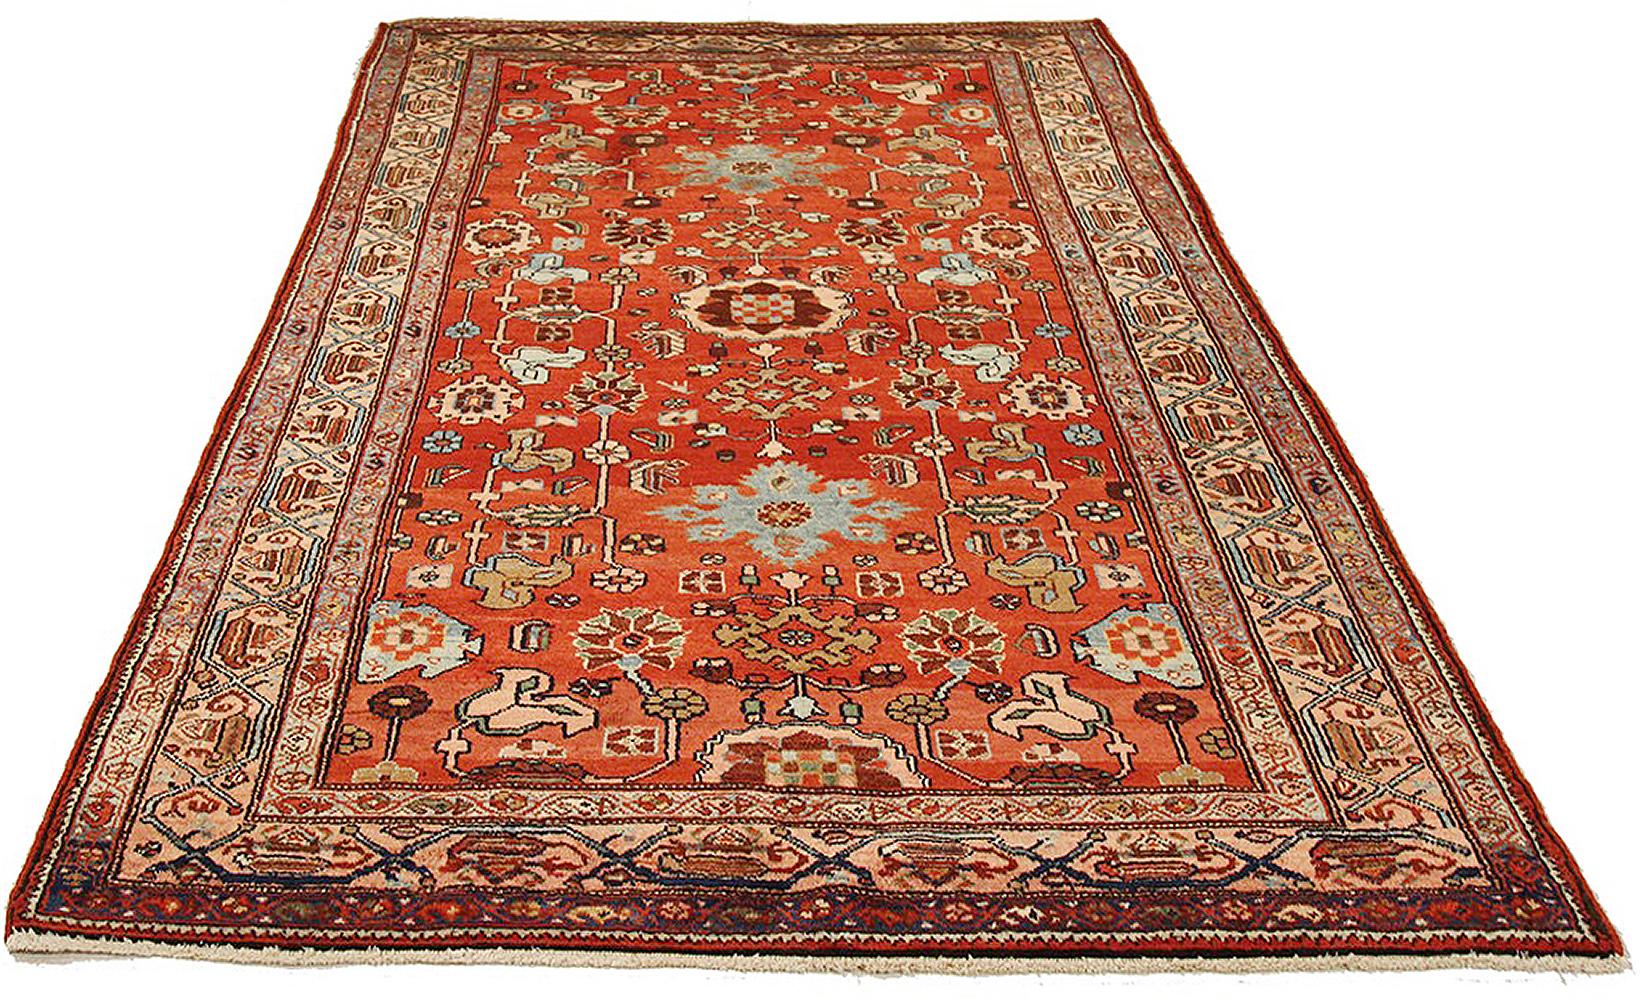 Antique Persian rug handwoven from the finest sheep’s wool and colored with all-natural vegetable dyes that are safe for humans and pets. It’s a traditional Hamedan design featuring floral patterns in lovely colors of blue and red over a beige and